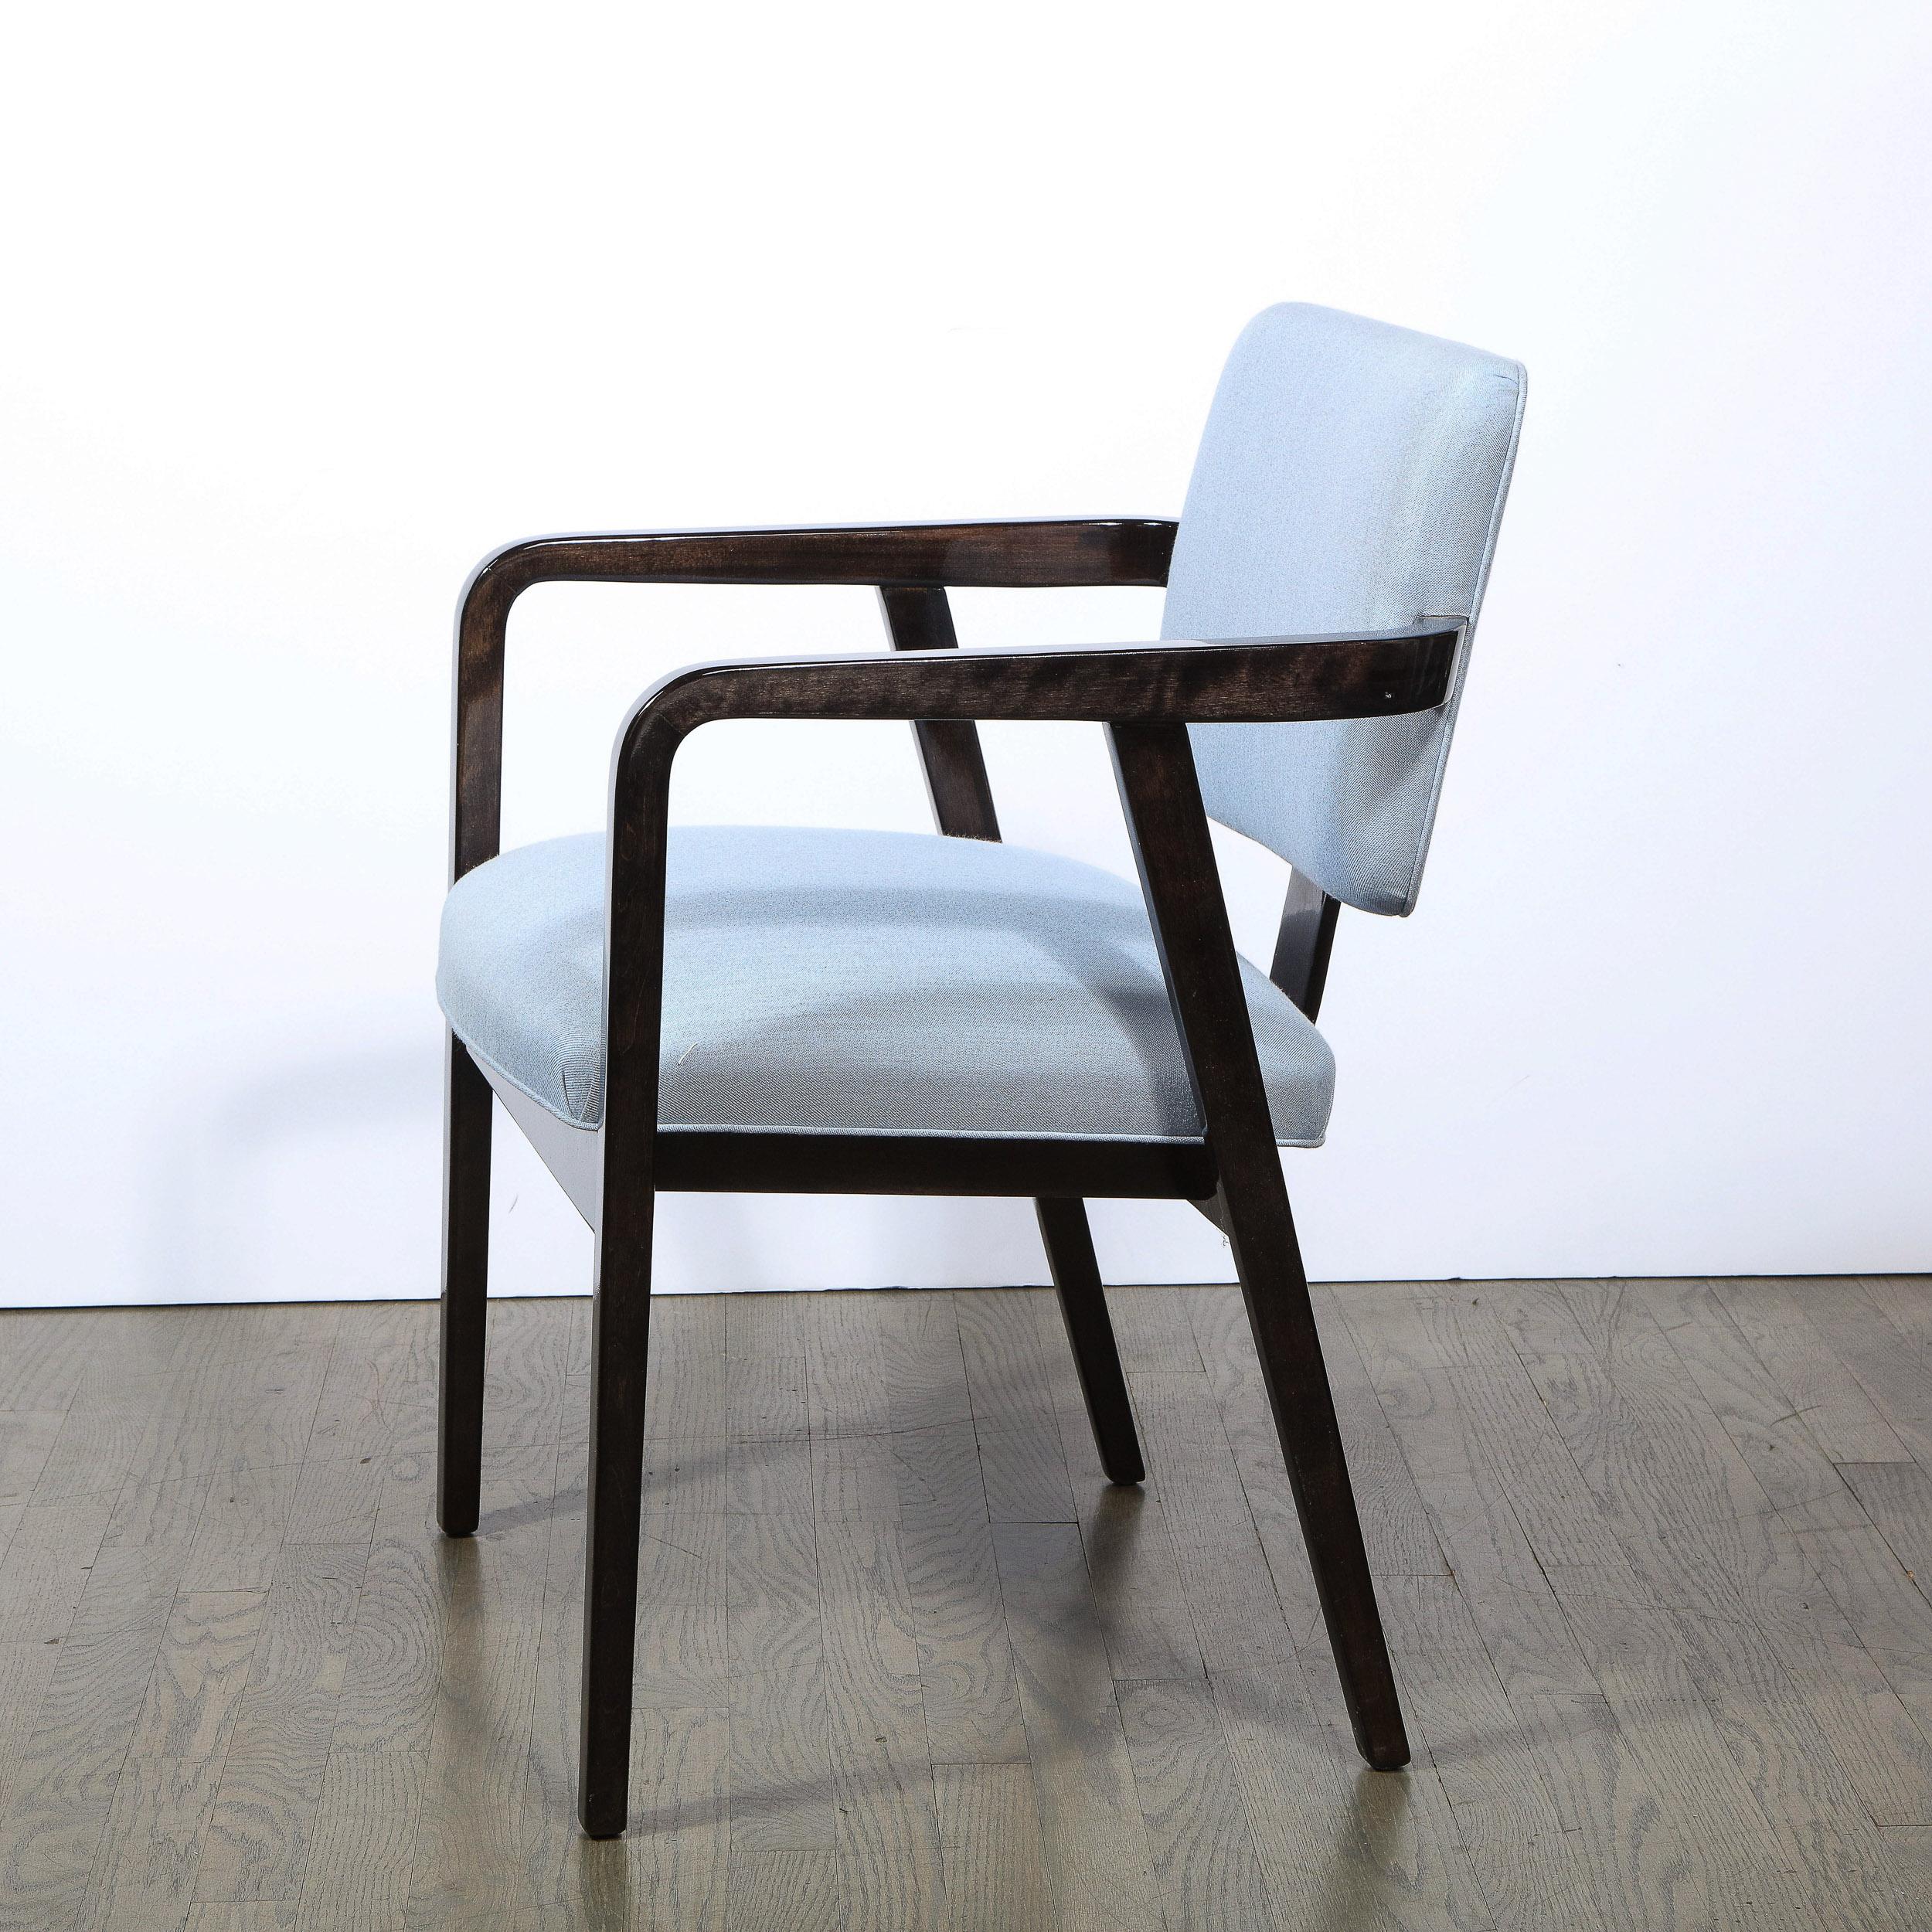 American Mid Century Side/Arm Chair in Ebonized Walnut by George Nelson for Herman Miller